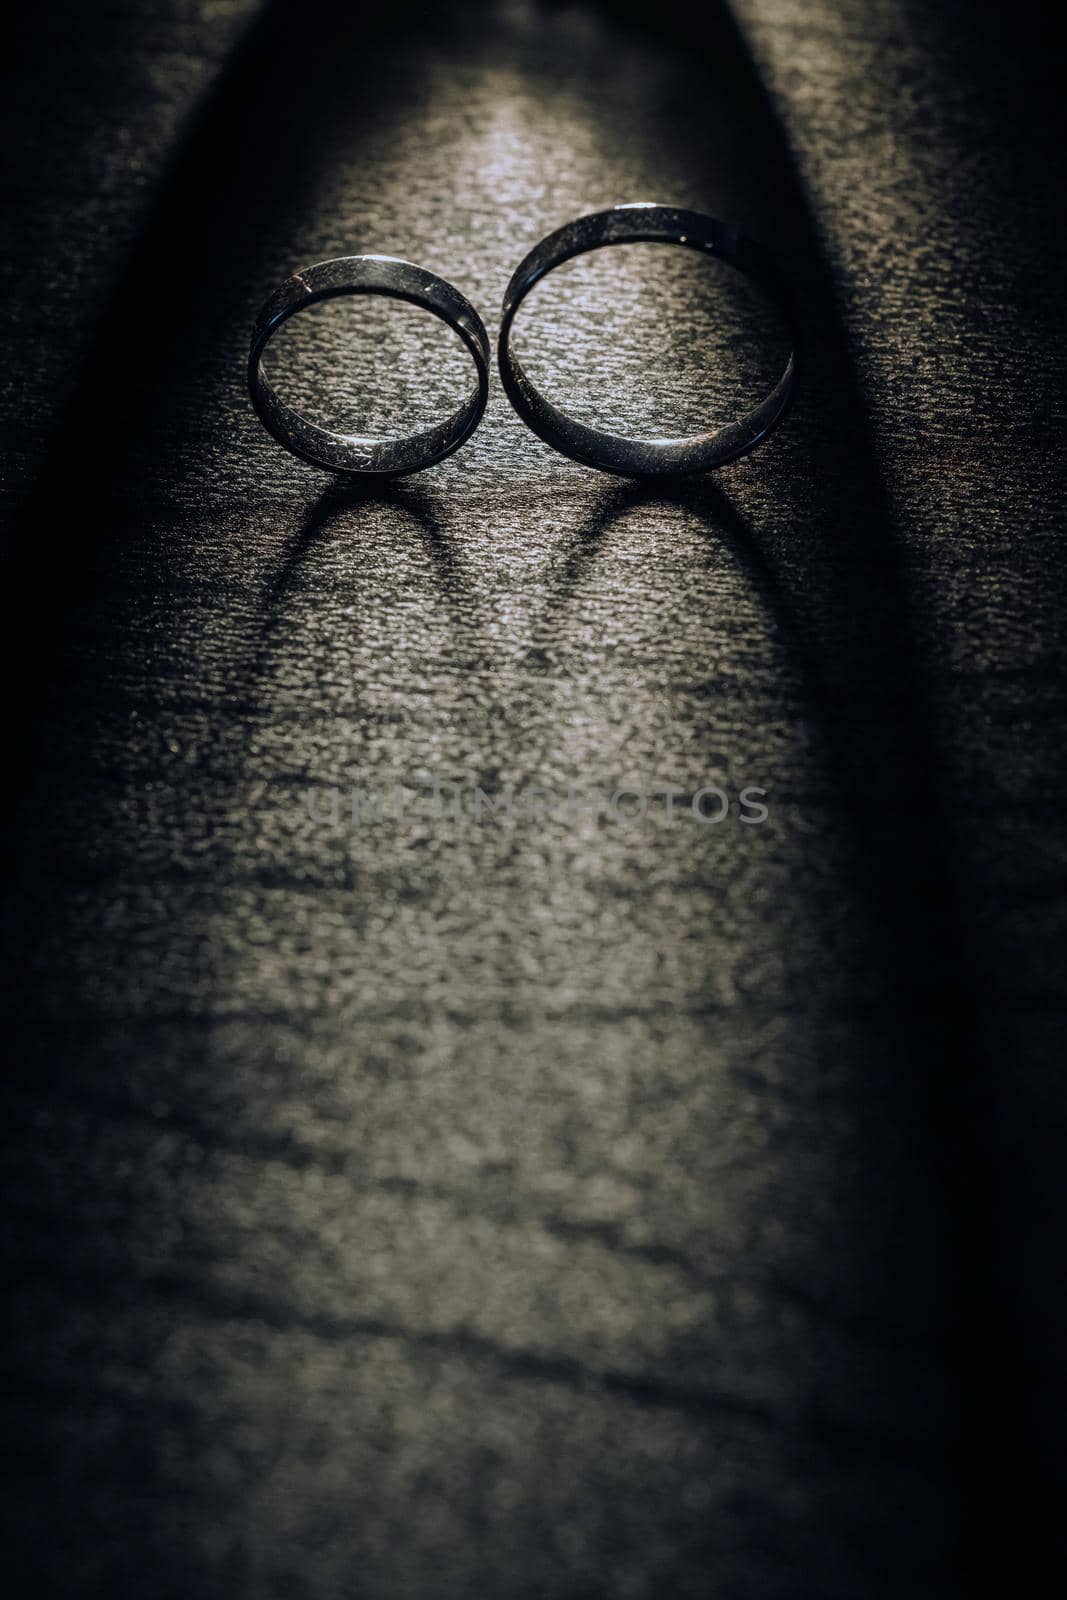 Close-up of two gold wedding rings on a black background by Lobachad